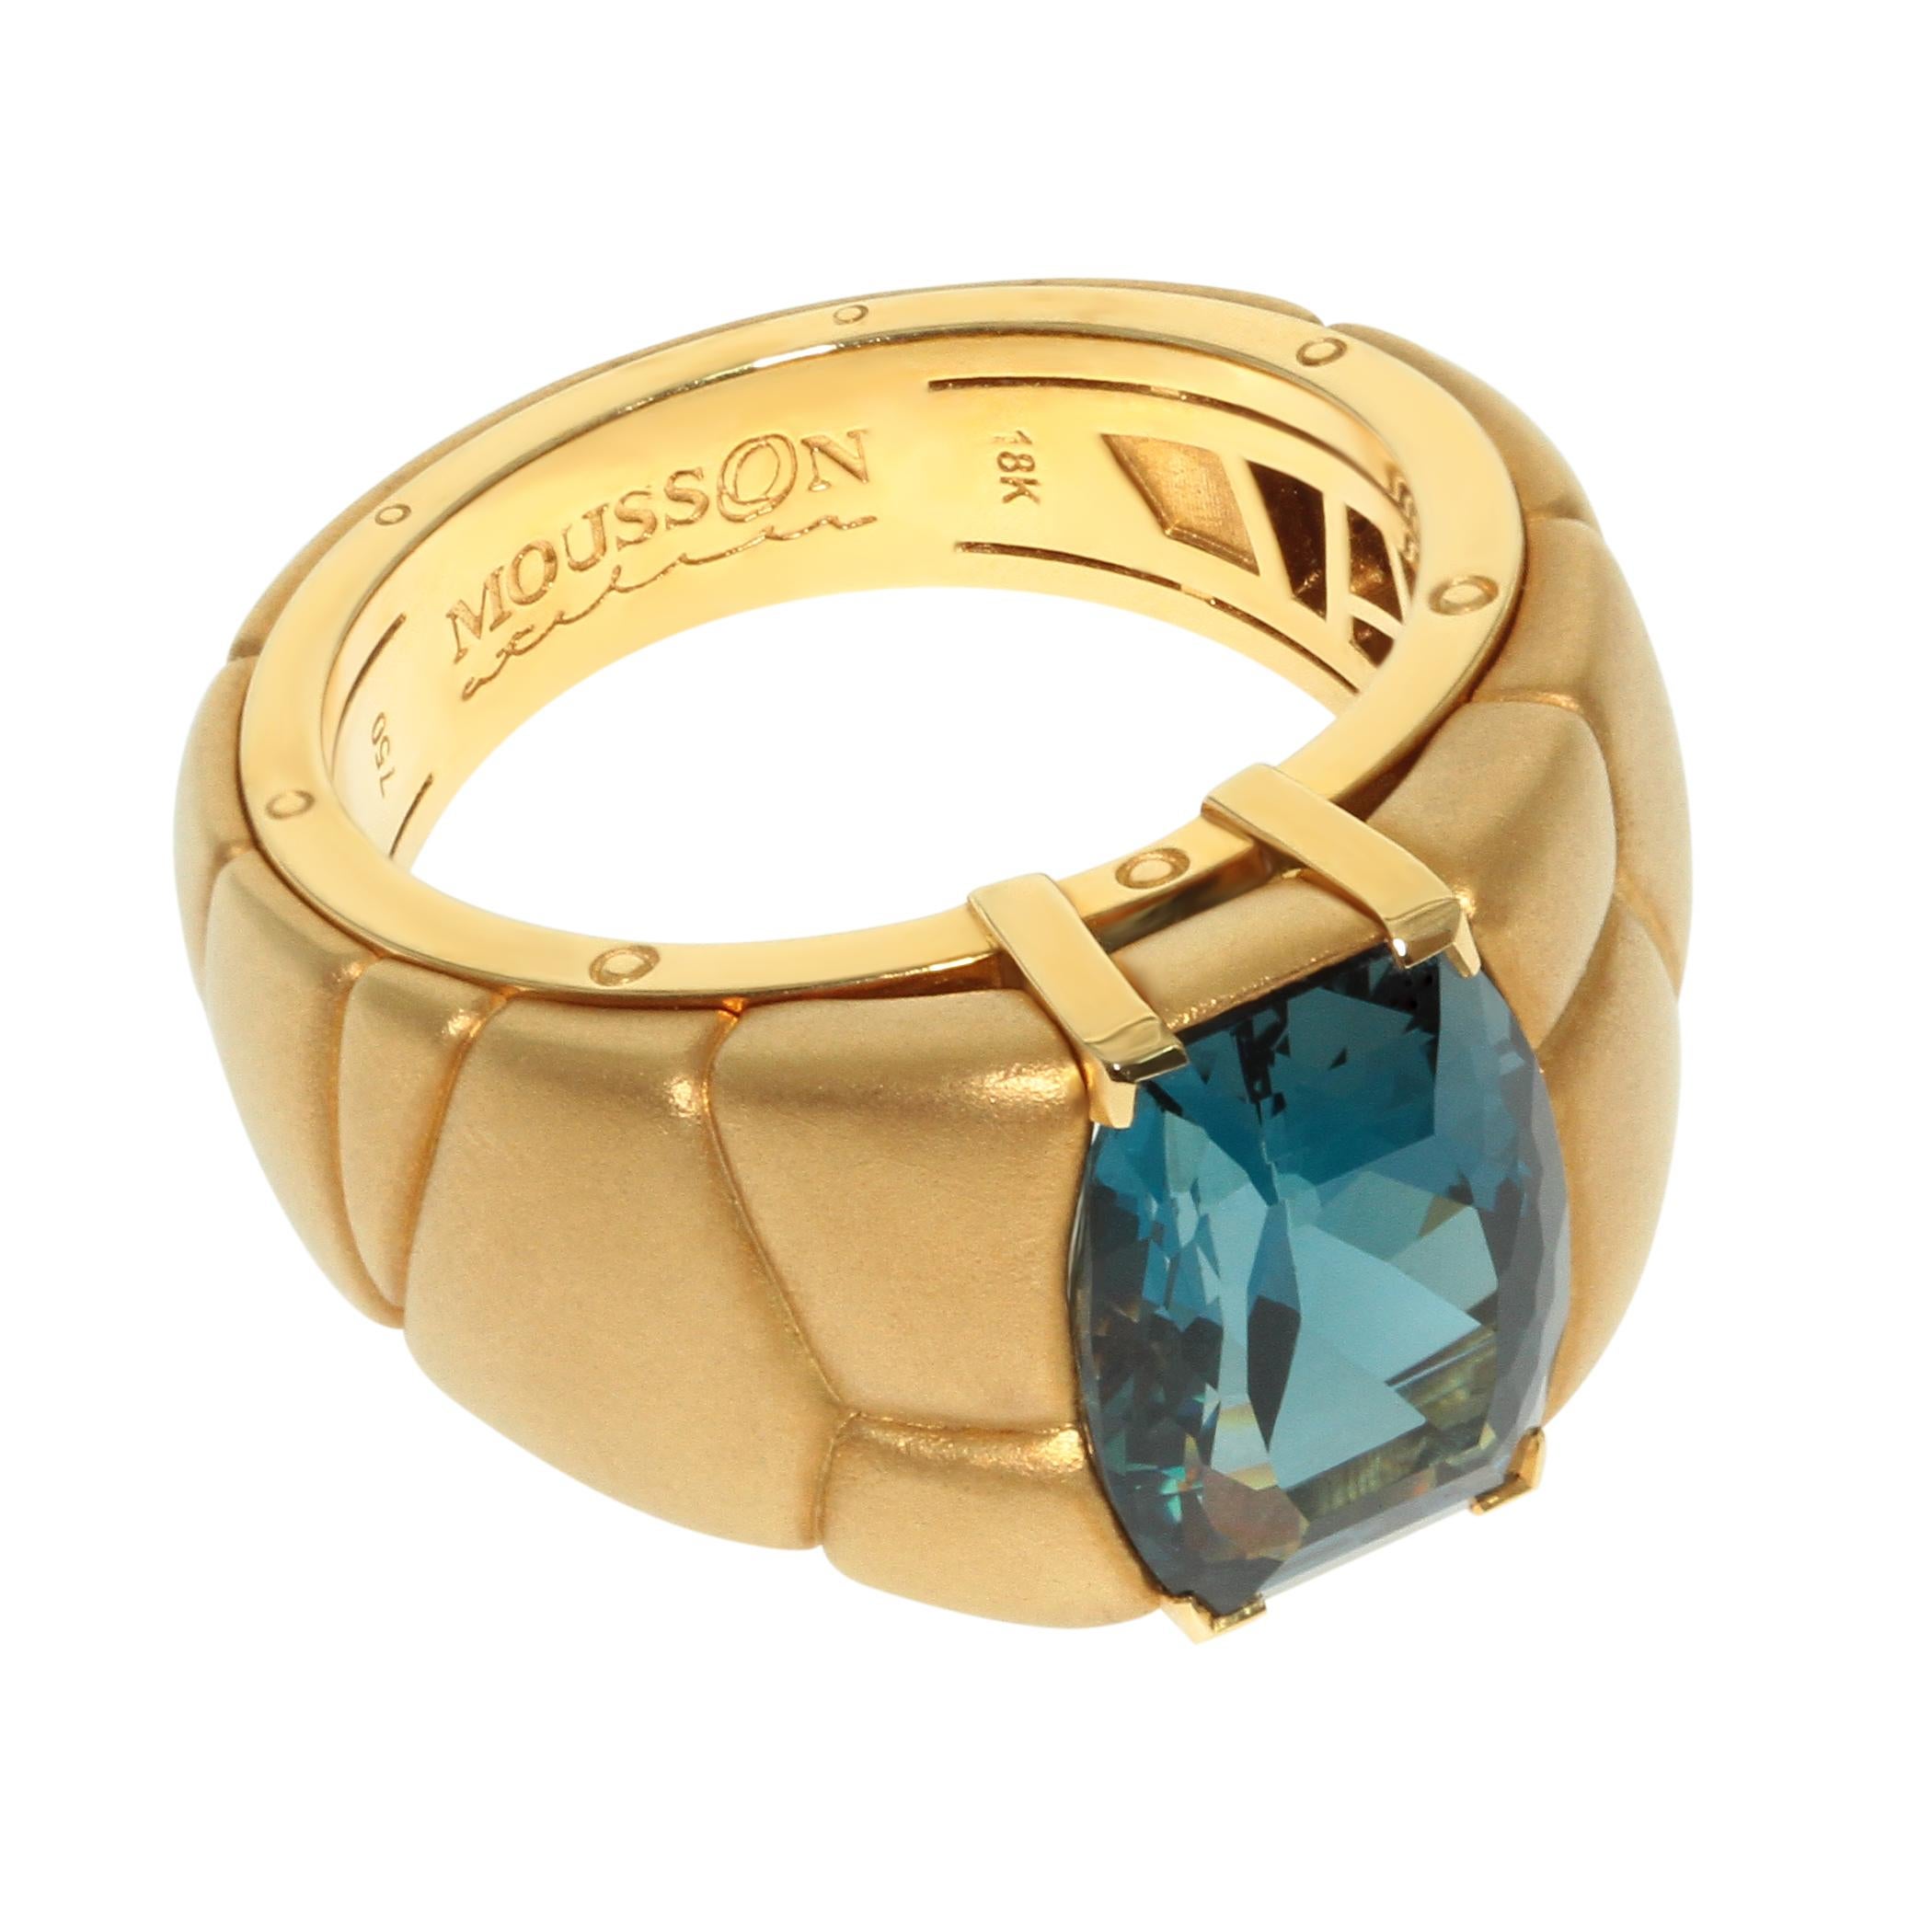 London Topaz 7.69 Carat 18 Karat Yellow Gold Male Inca Ring

As you know, the Inca Empire in the XII-XVI centuries built walls without using cement. All the stones were customized individually, so the walls look so unusual. So our designers,